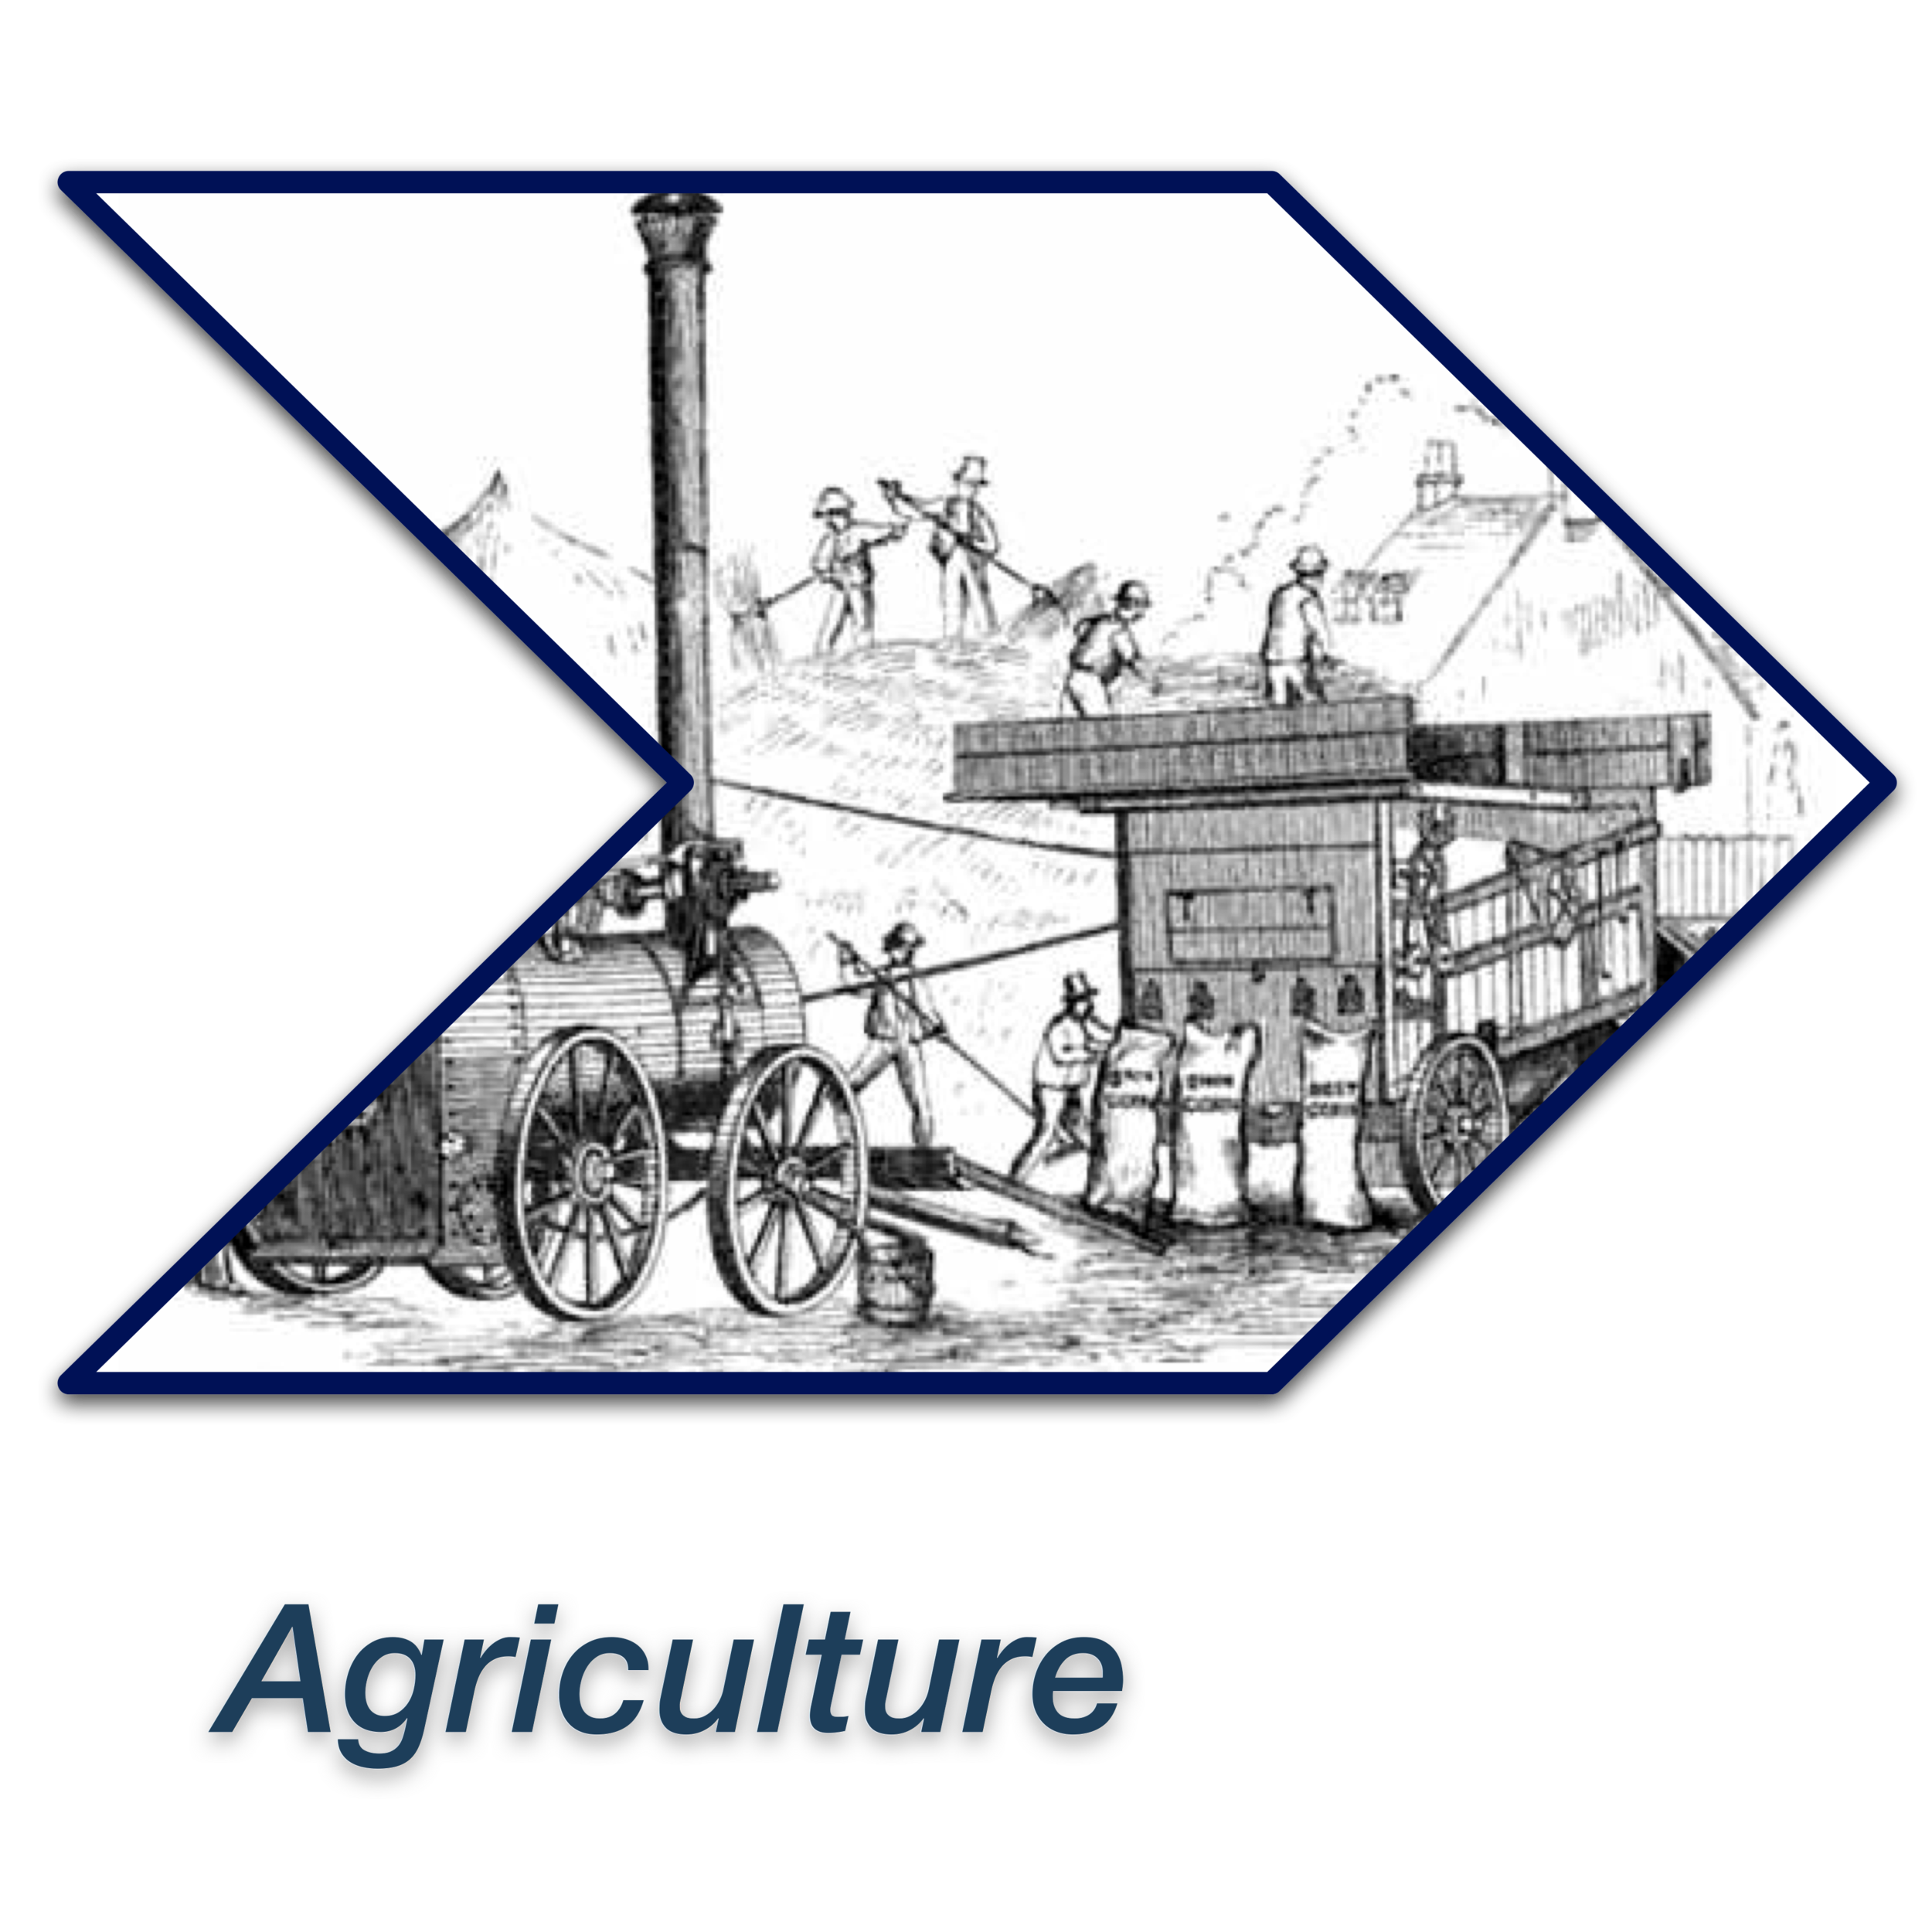 Revs Agricultural Industry 01.png